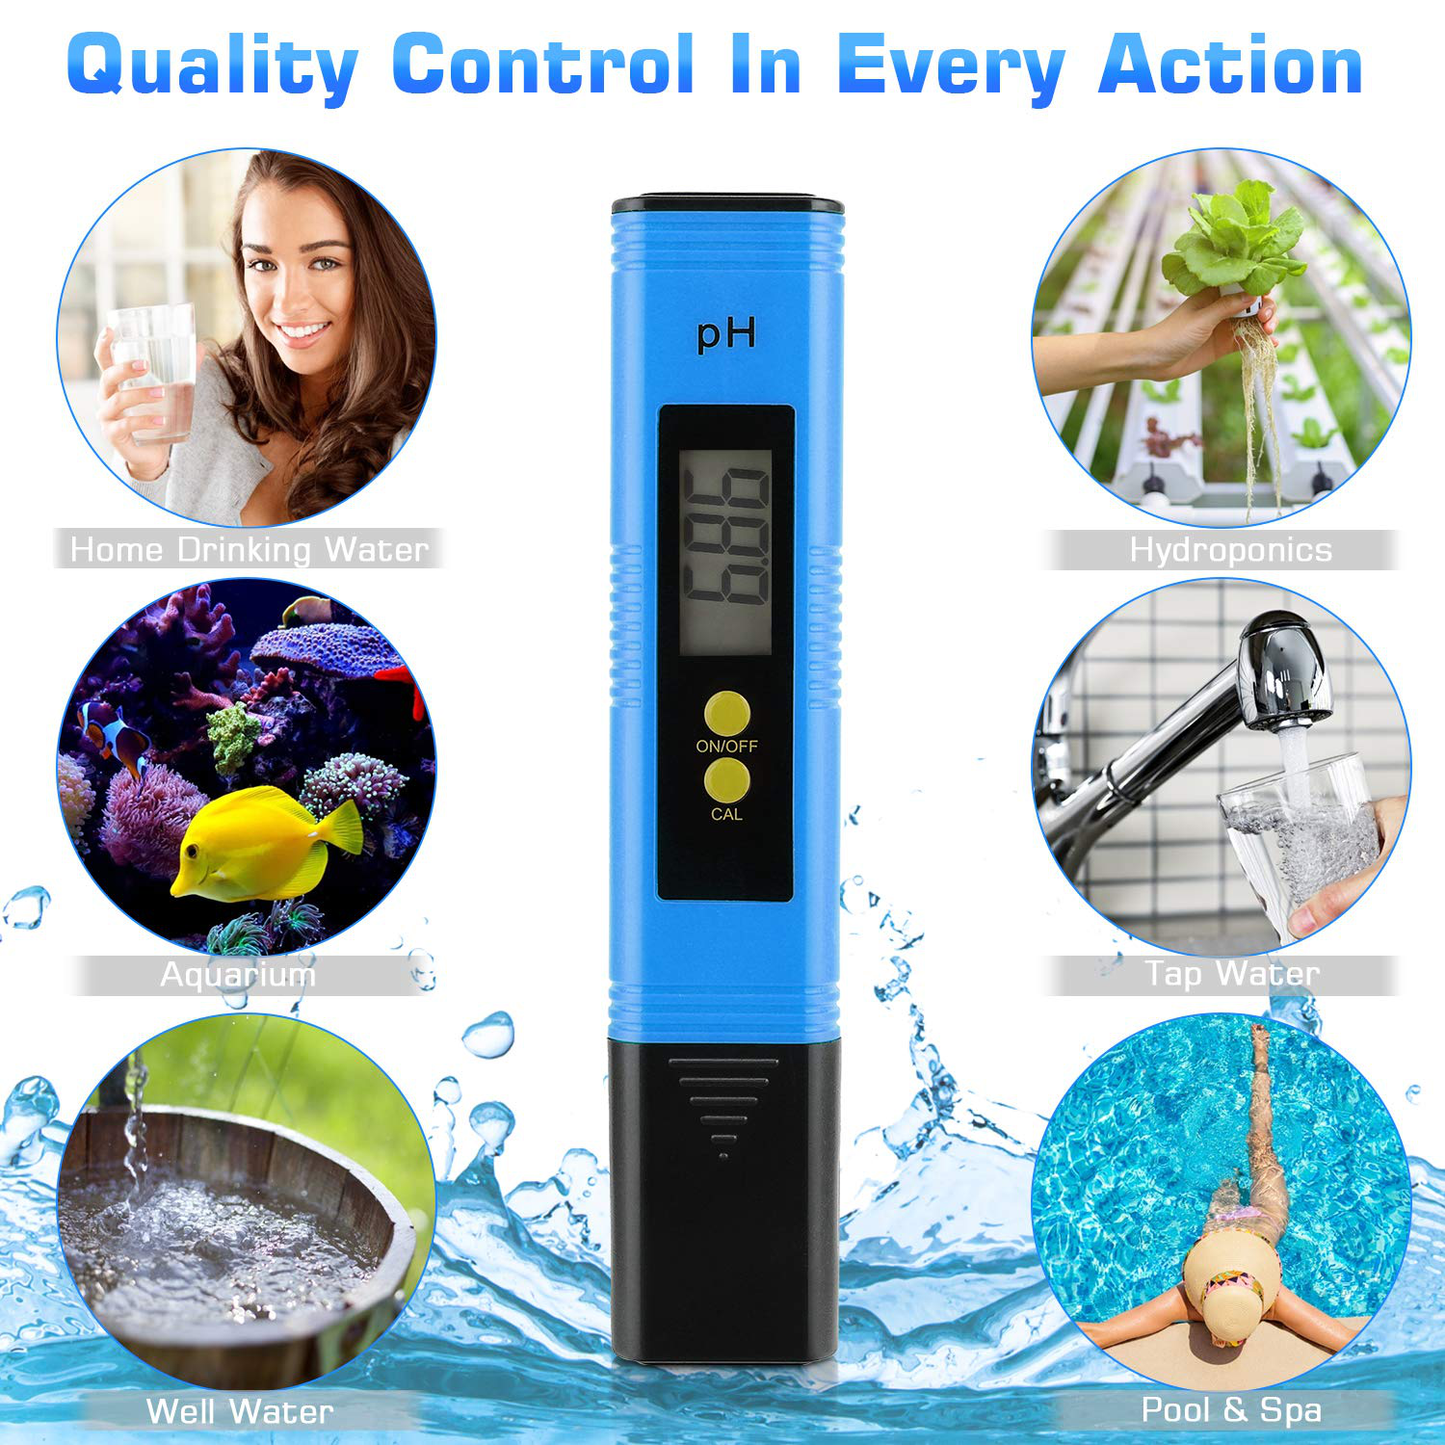 PH Meter for Water Hydroponics Digital PH Tester Pen 0.01 High Accuracy Pocket Size with 0-14 PH Measurement Range for Household Drinking, Pool and Aquarium (Yellow)